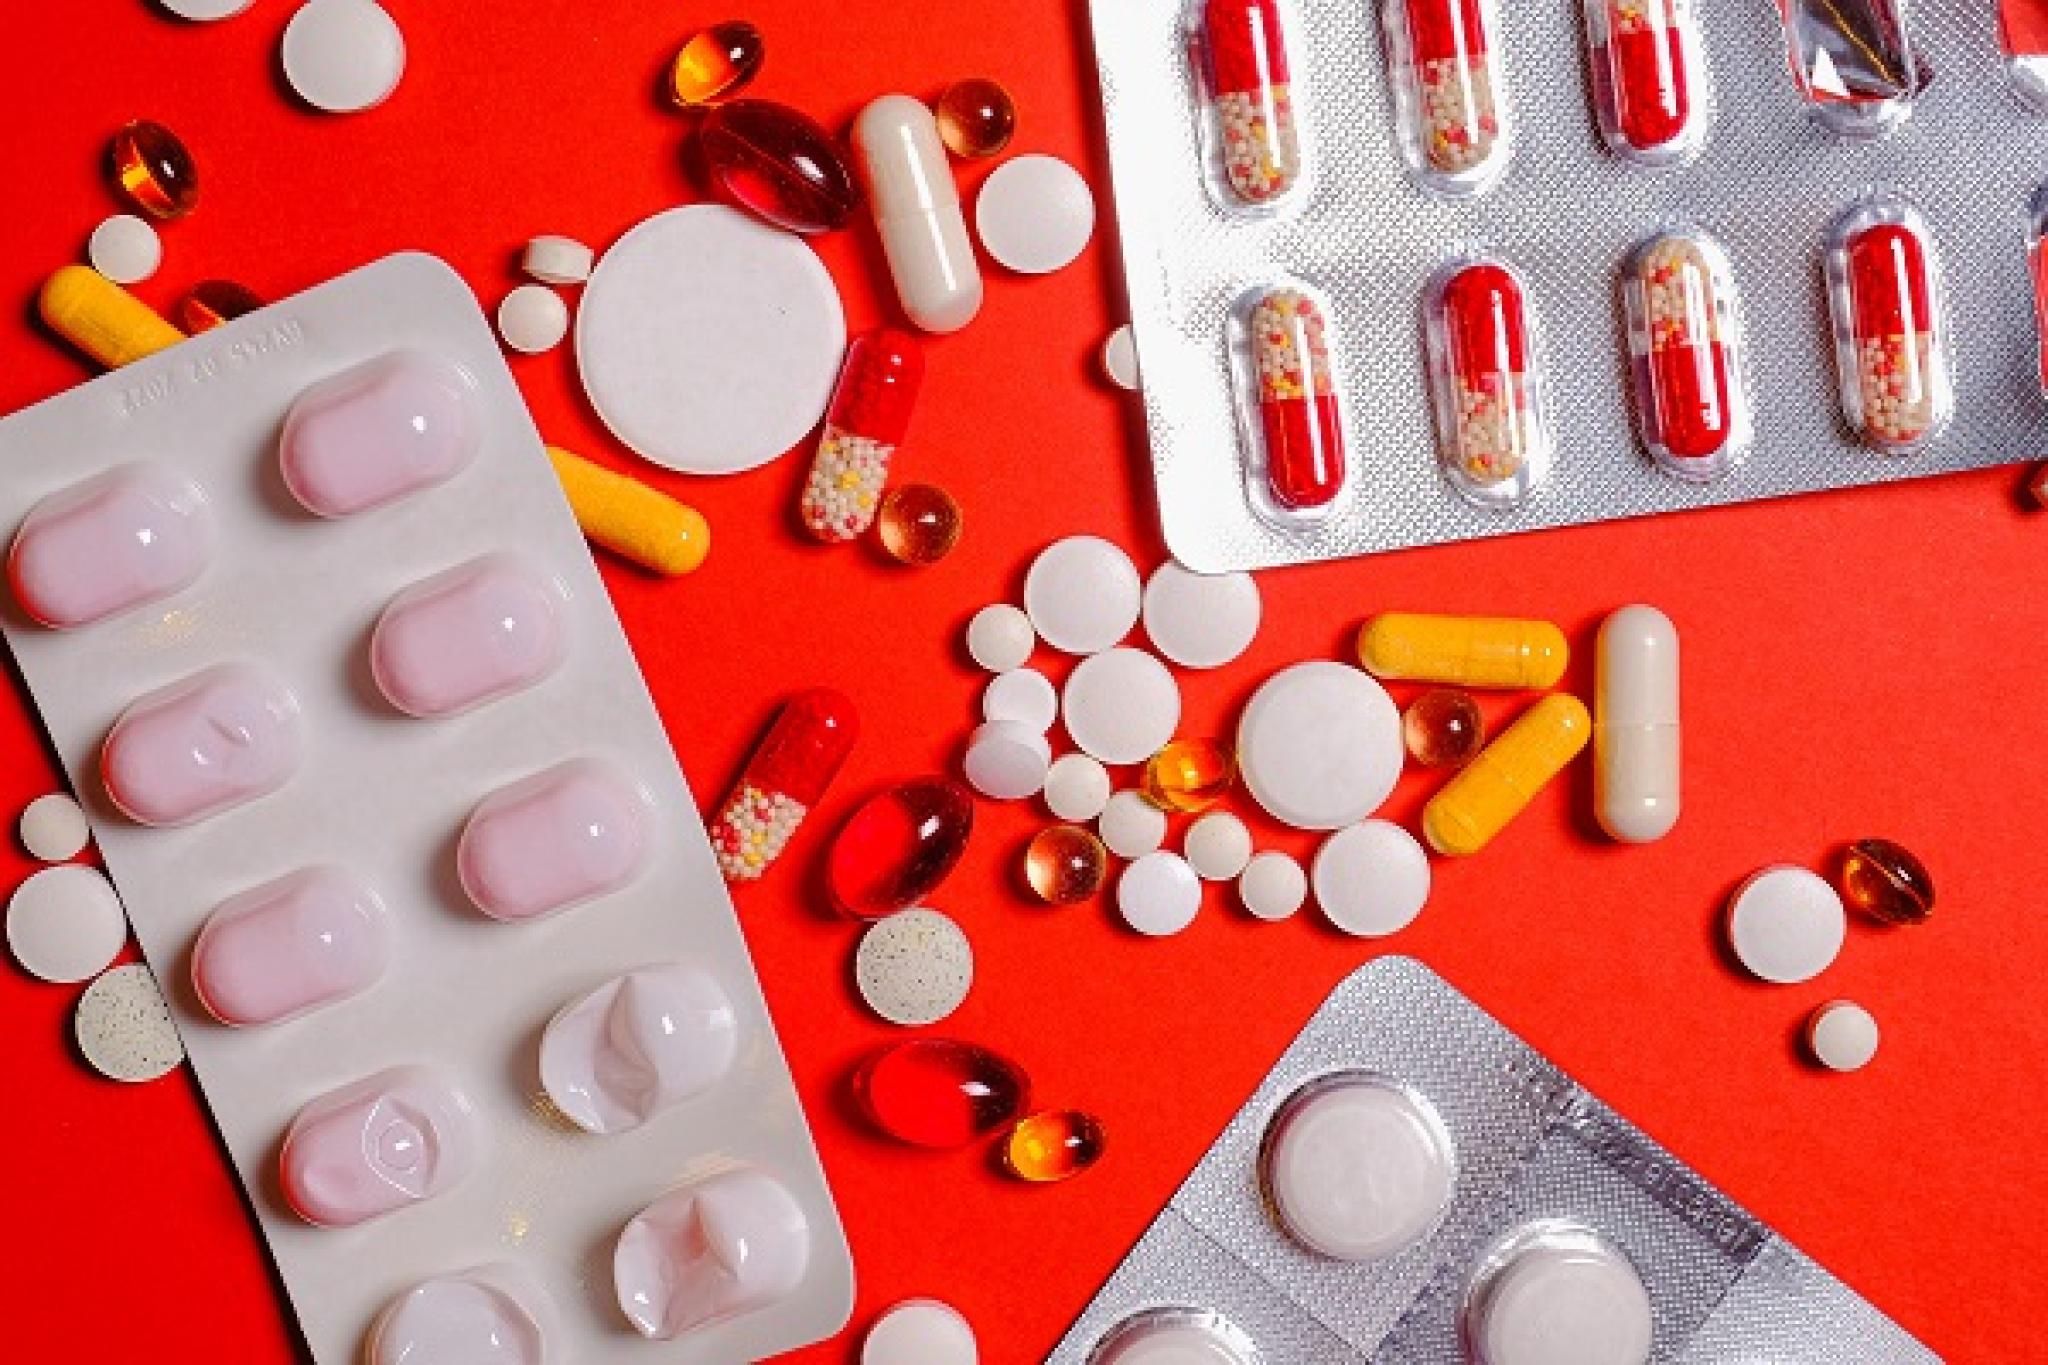 Image of medications by Anna Shvets from https://www.pexels.com/photo/white-and-red-medication-pill-blister-pack-3683086/ 